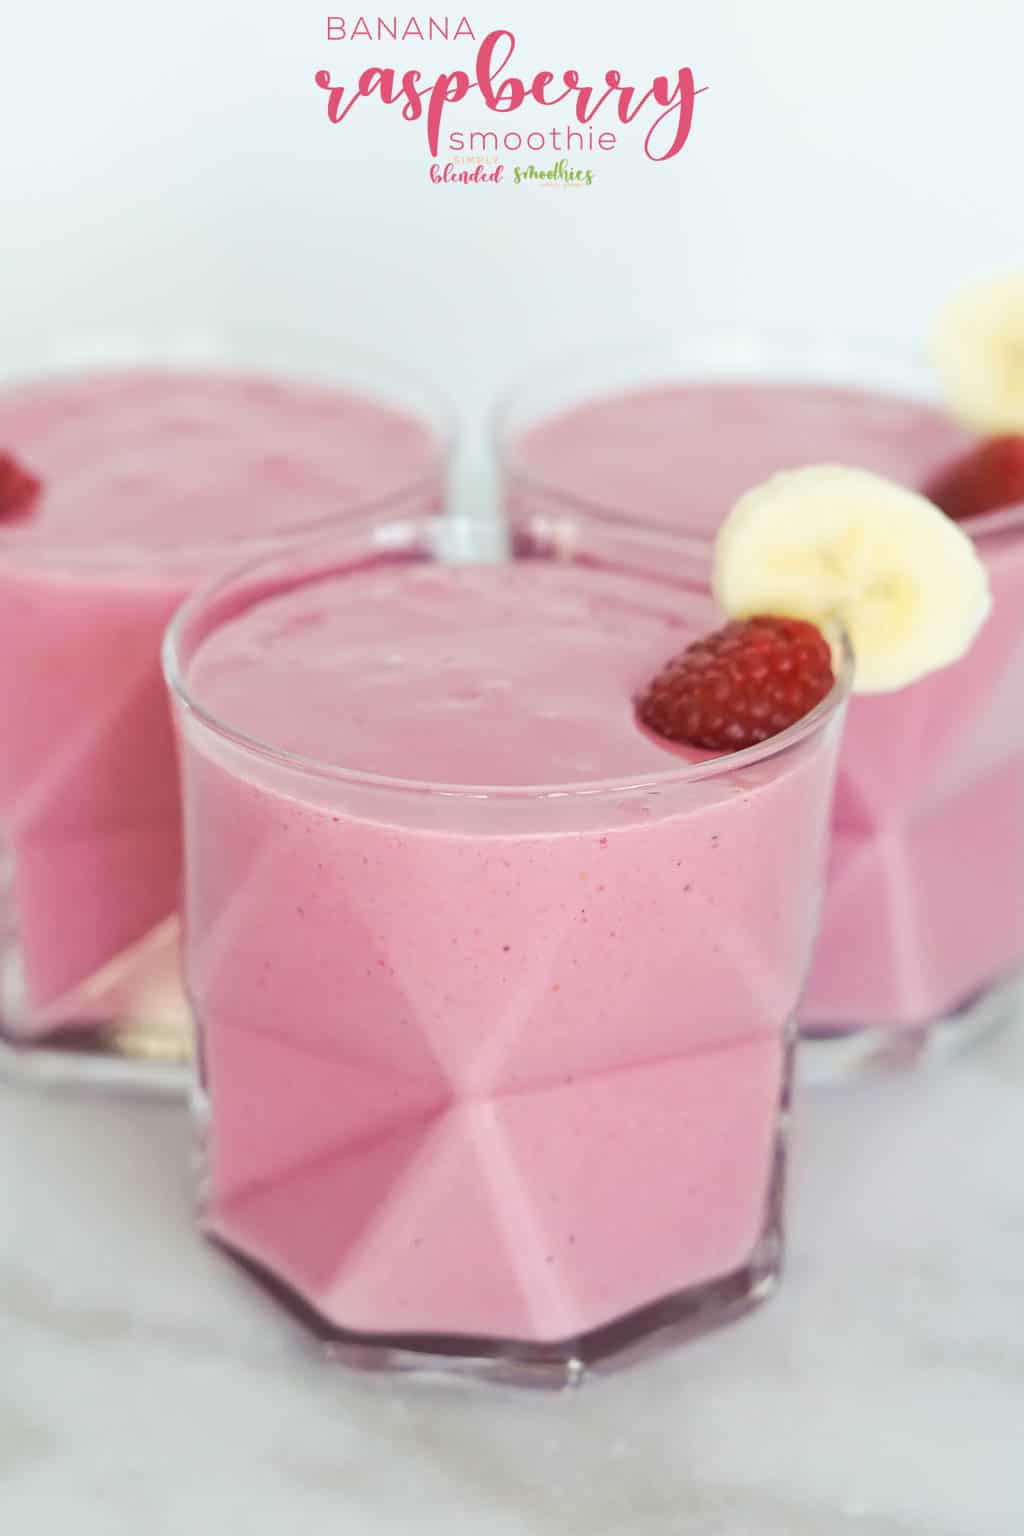 Raspberry Banana Smoothie - This Smoothie Recipe Is A Delicious And Healthy Smoothie